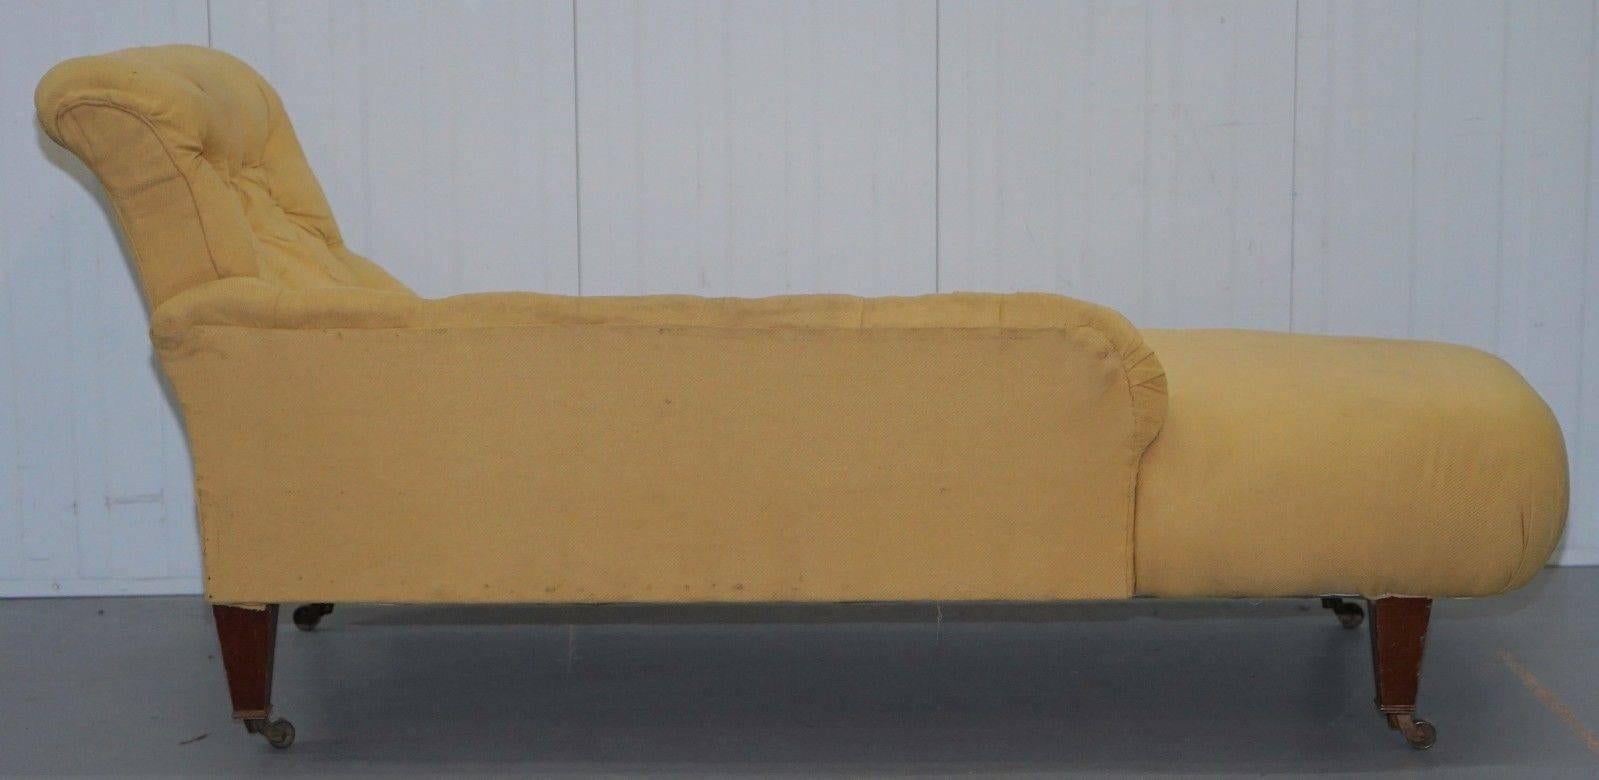 Victorian Original Period Howard & Sons Fully Stamped with Castors Chaise Lounge Daybed